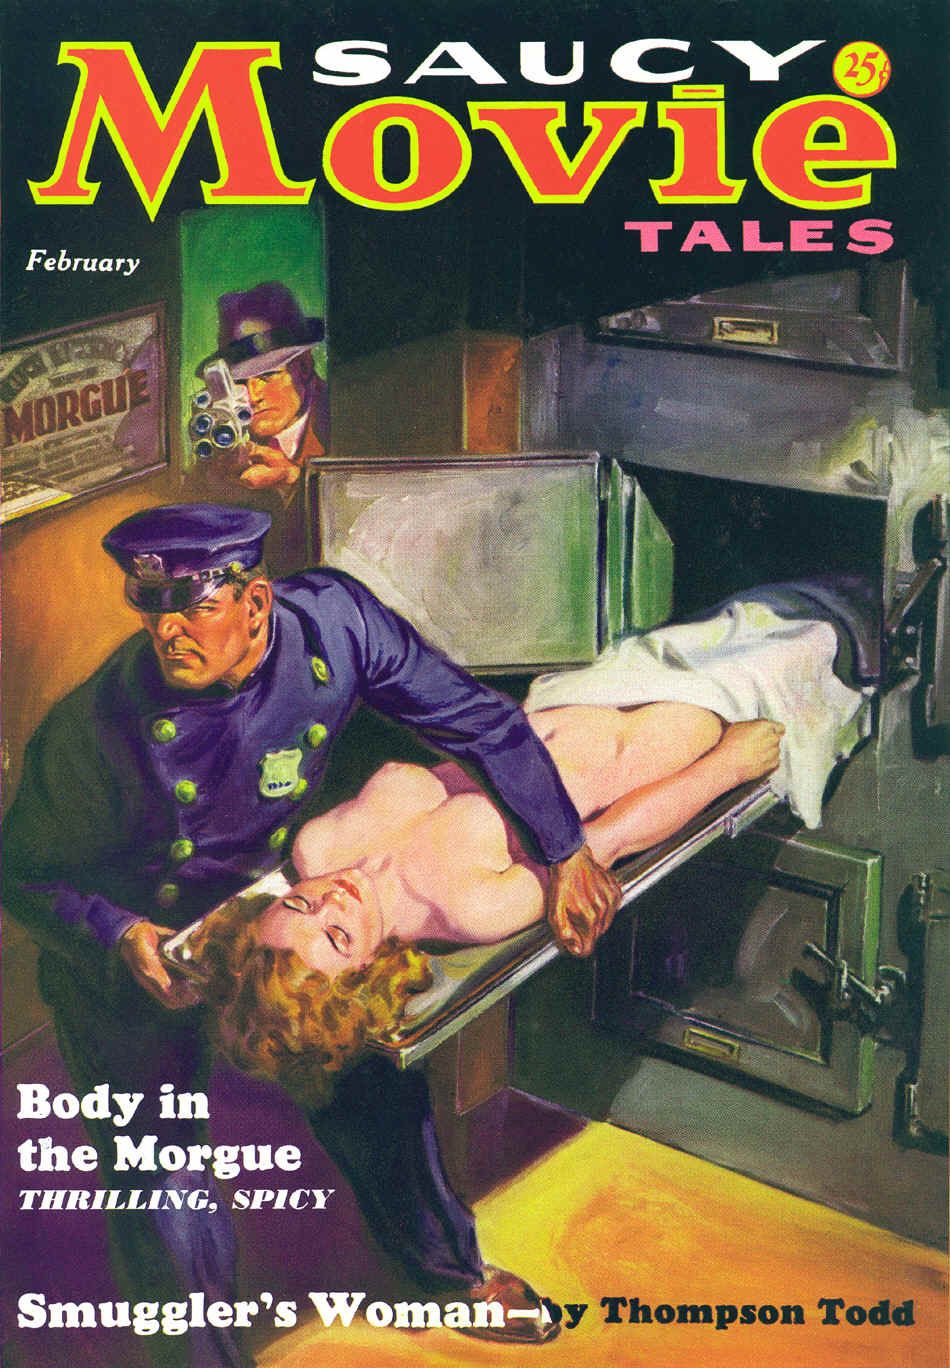 Norman saunders saucy movie tales